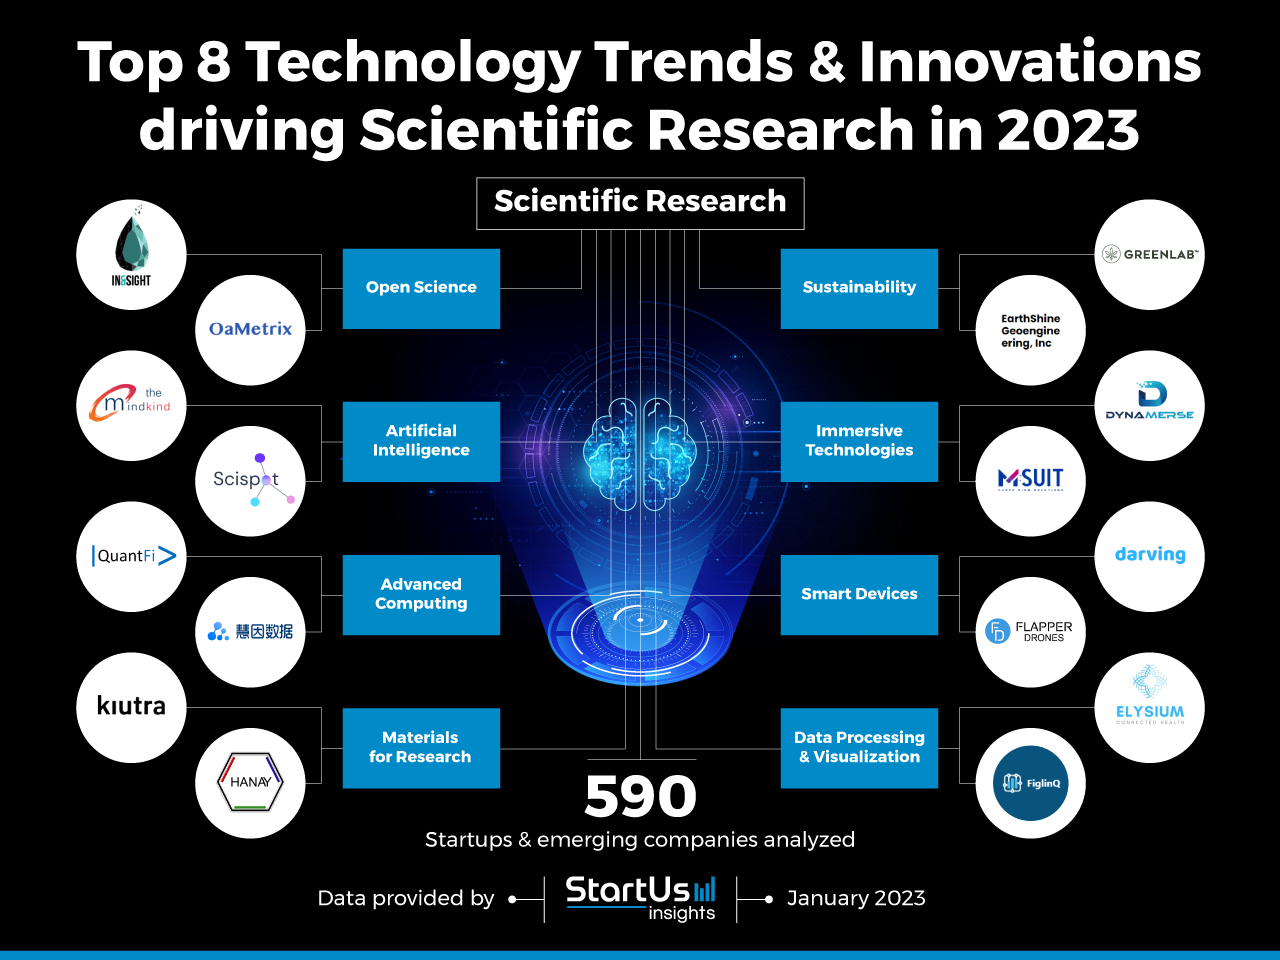 Top 8 Technology Trends & Innovations driving Scientific Research in 2023